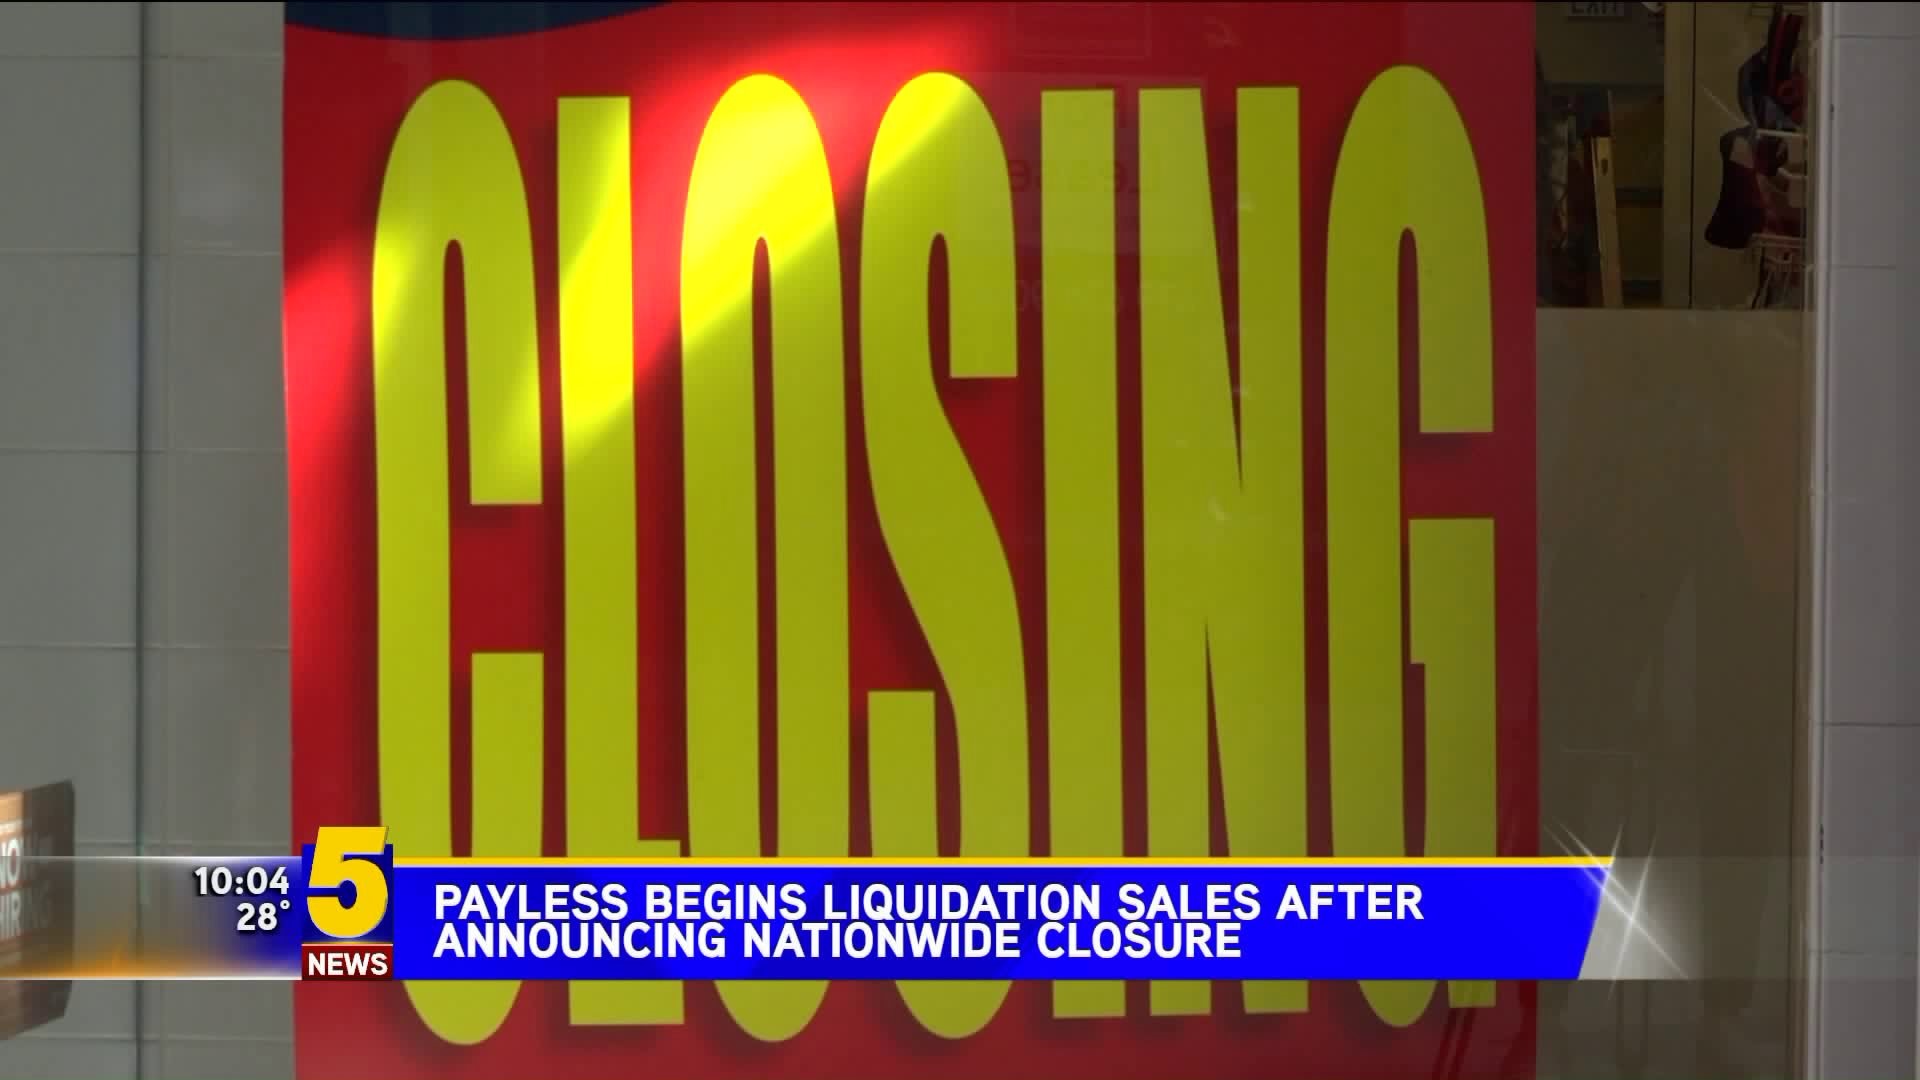 PAYLESS BEGINS LIQUIDATION SALES AFTER ANNOUNCING NATIONWIDE CLOSURE